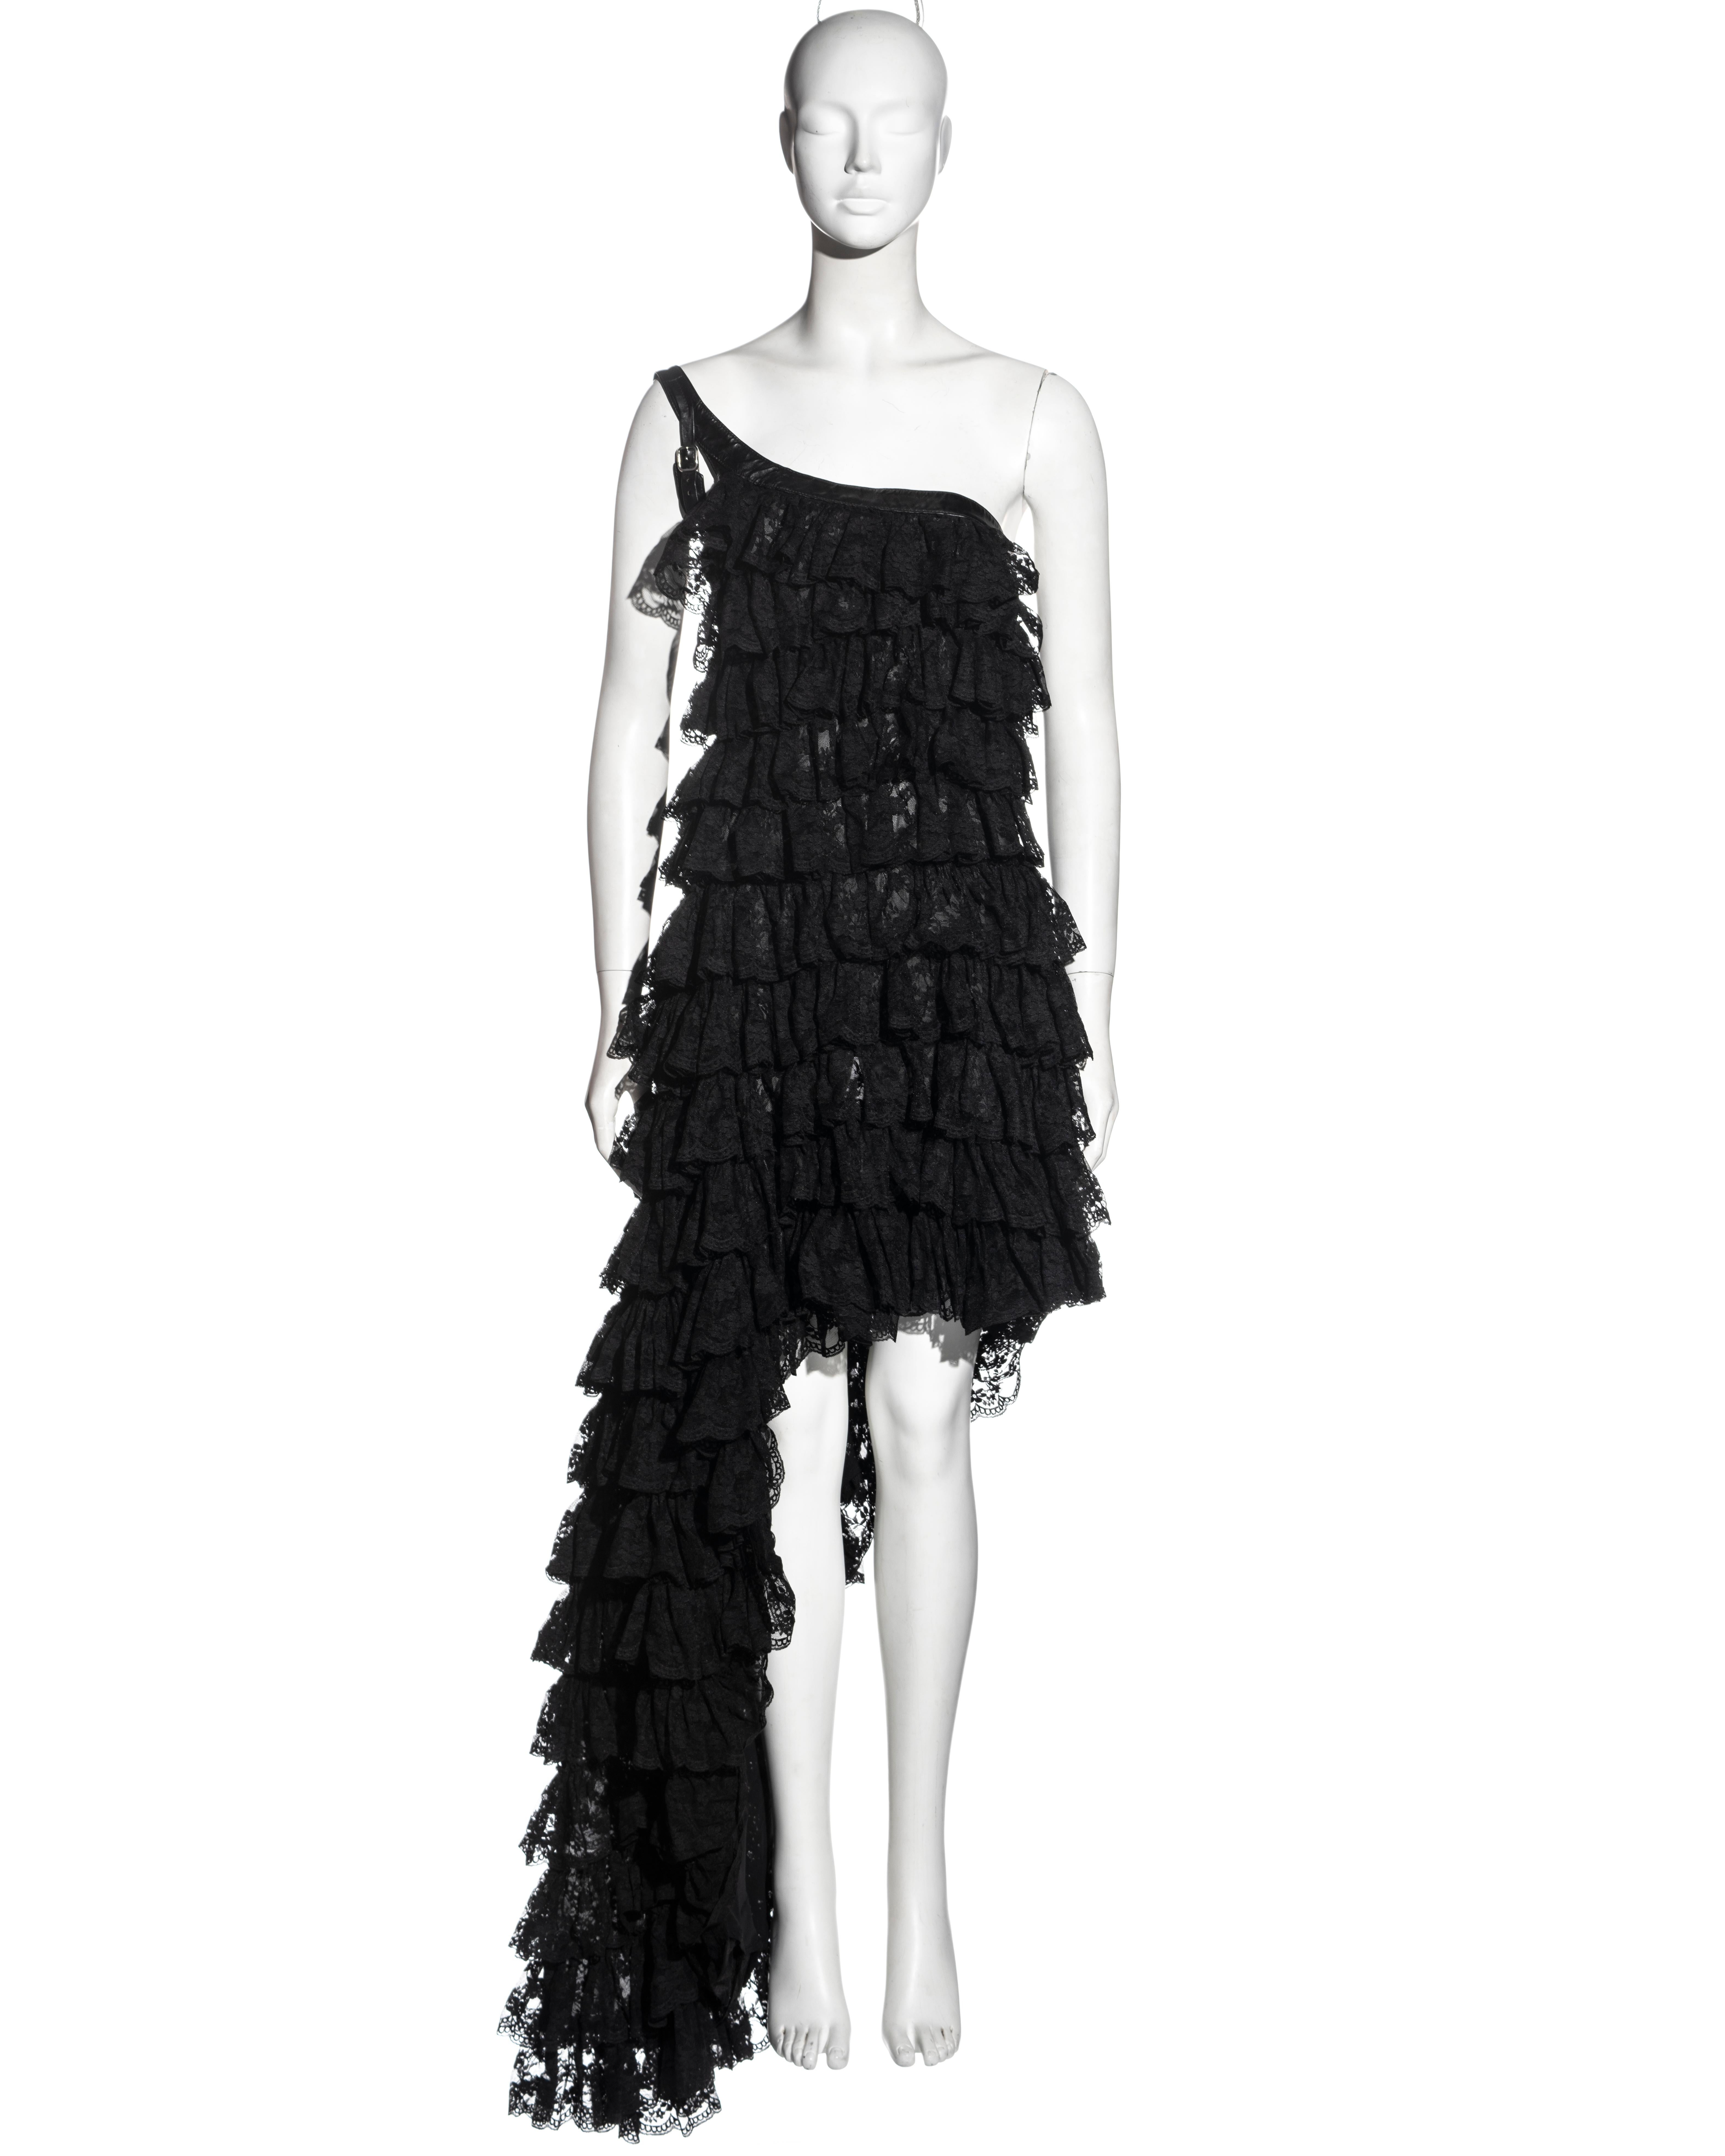 ▪ Alexander McQueen black lace evening dress
▪ Leather trim and shoulder strap with metal buckle
▪ Tiered skirt, made of several horizontal layers of lace
▪ Knee length skirt descending into a floor-length train
▪ IT 40 - FR 36 - UK 8 - US 4
▪